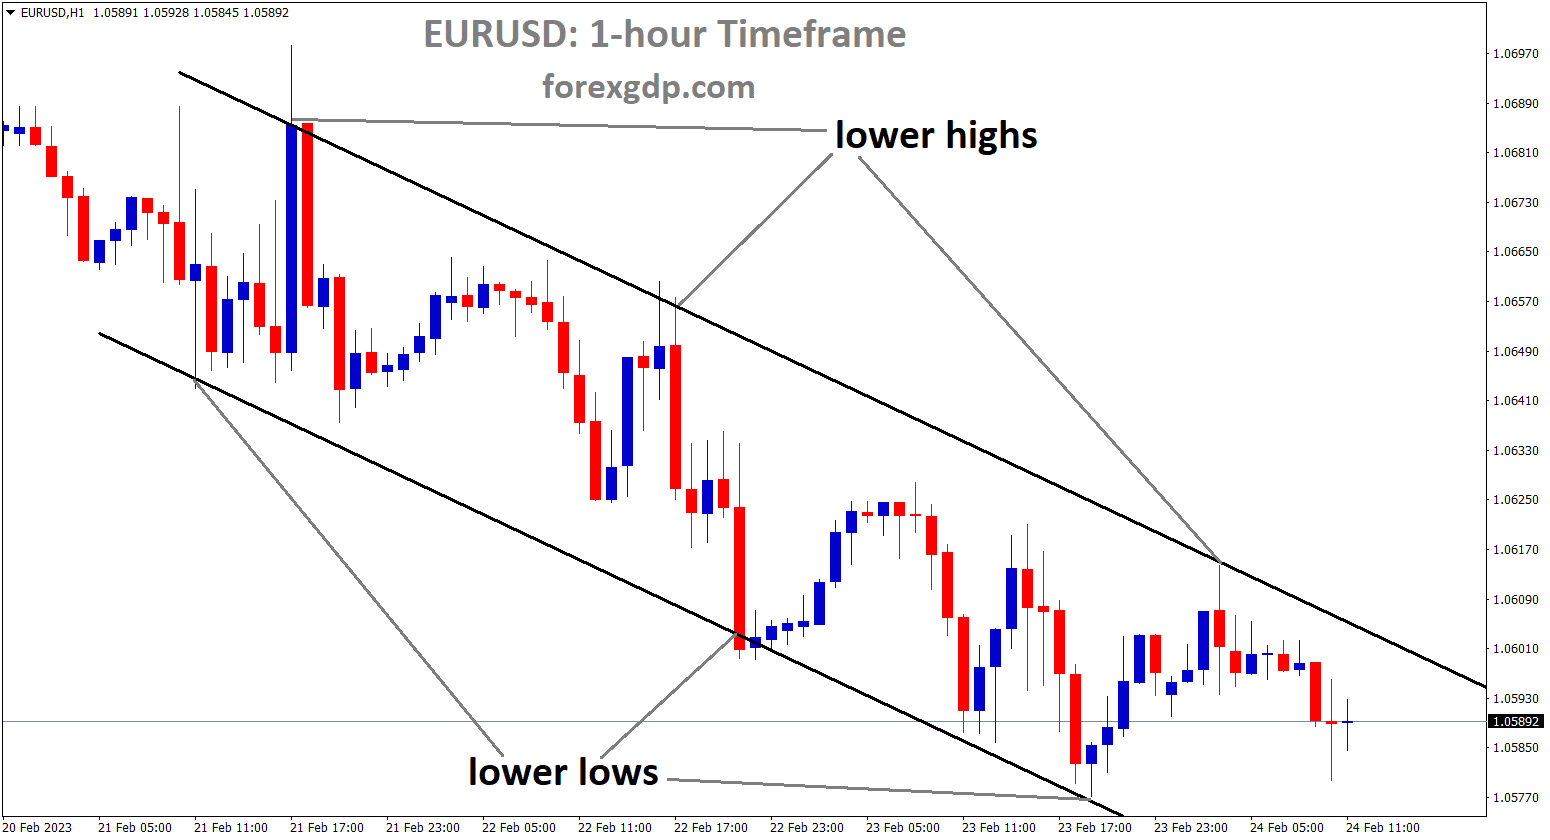 EURUSD is moving in Descending channel and the market has fallen from the lower high area of the channel.